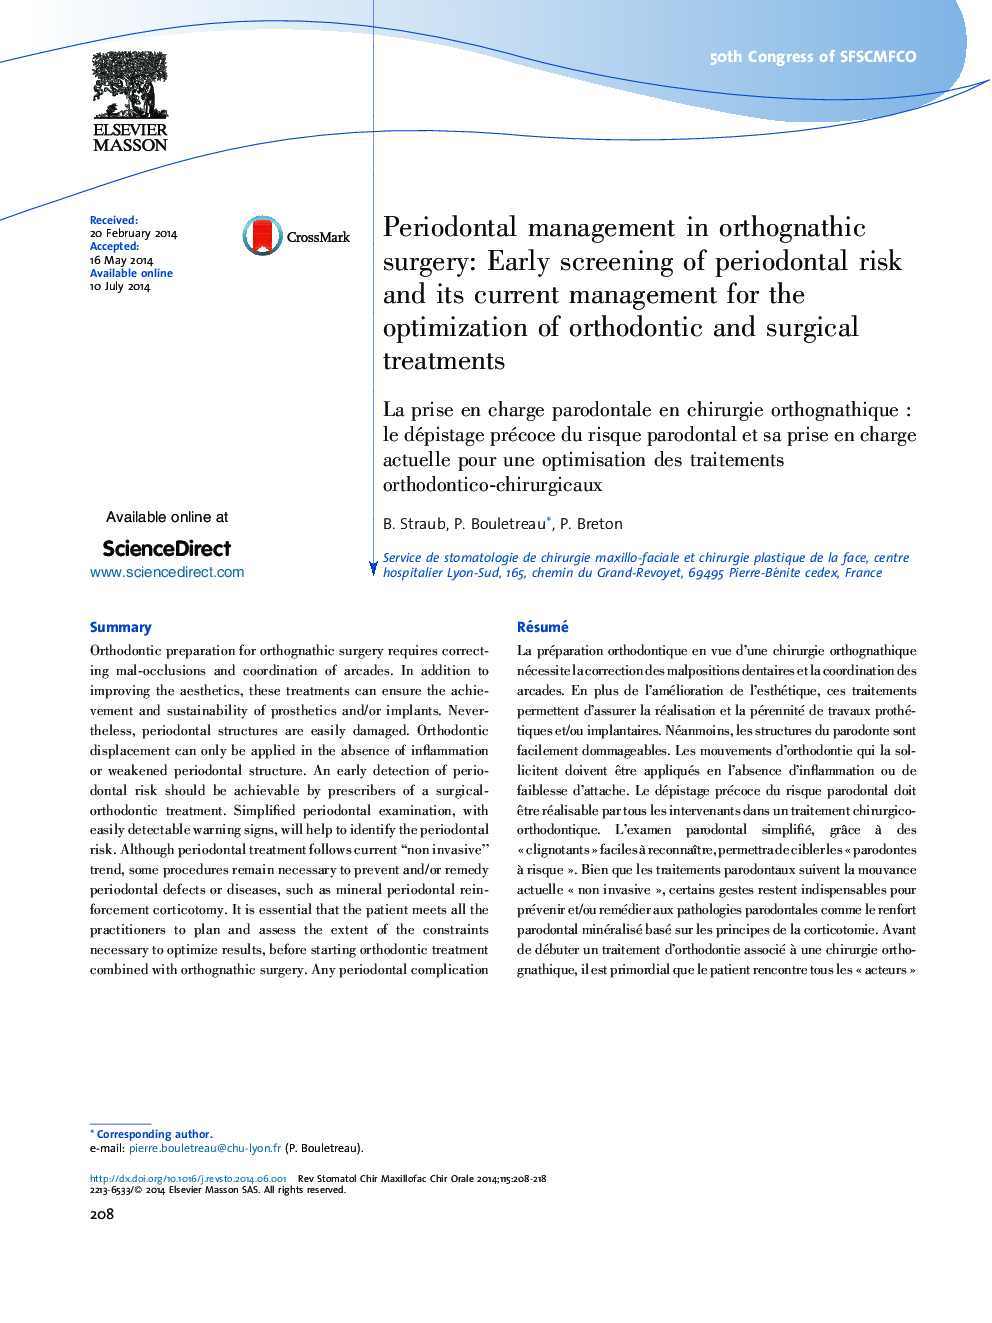 Periodontal management in orthognathic surgery: Early screening of periodontal risk and its current management for the optimization of orthodontic and surgical treatments